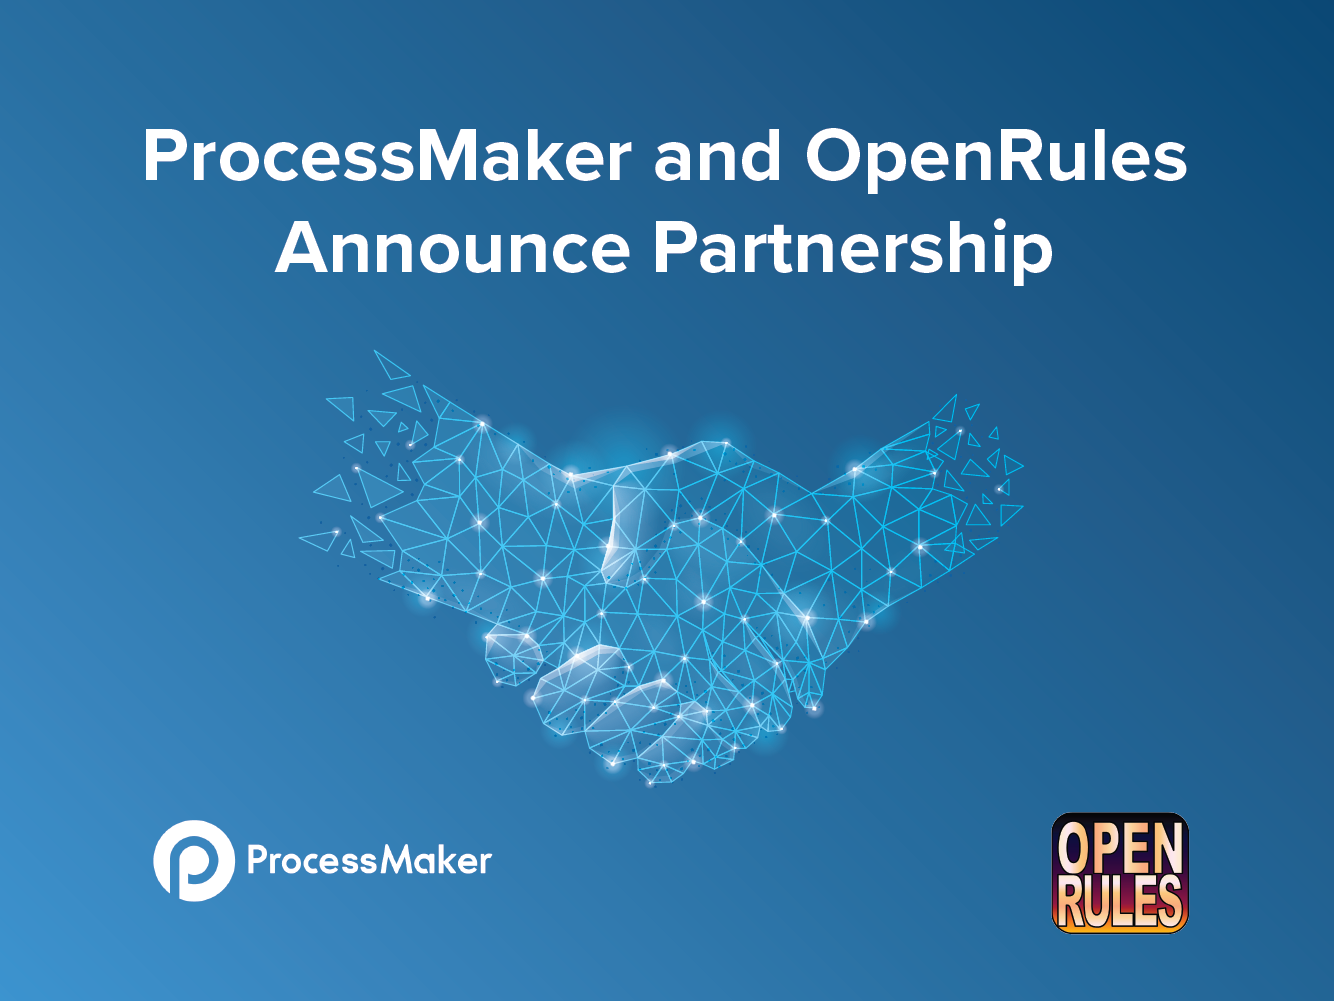 ProcessMaker Announces New Partnership with OpenRules for Decision Management and Business Rules